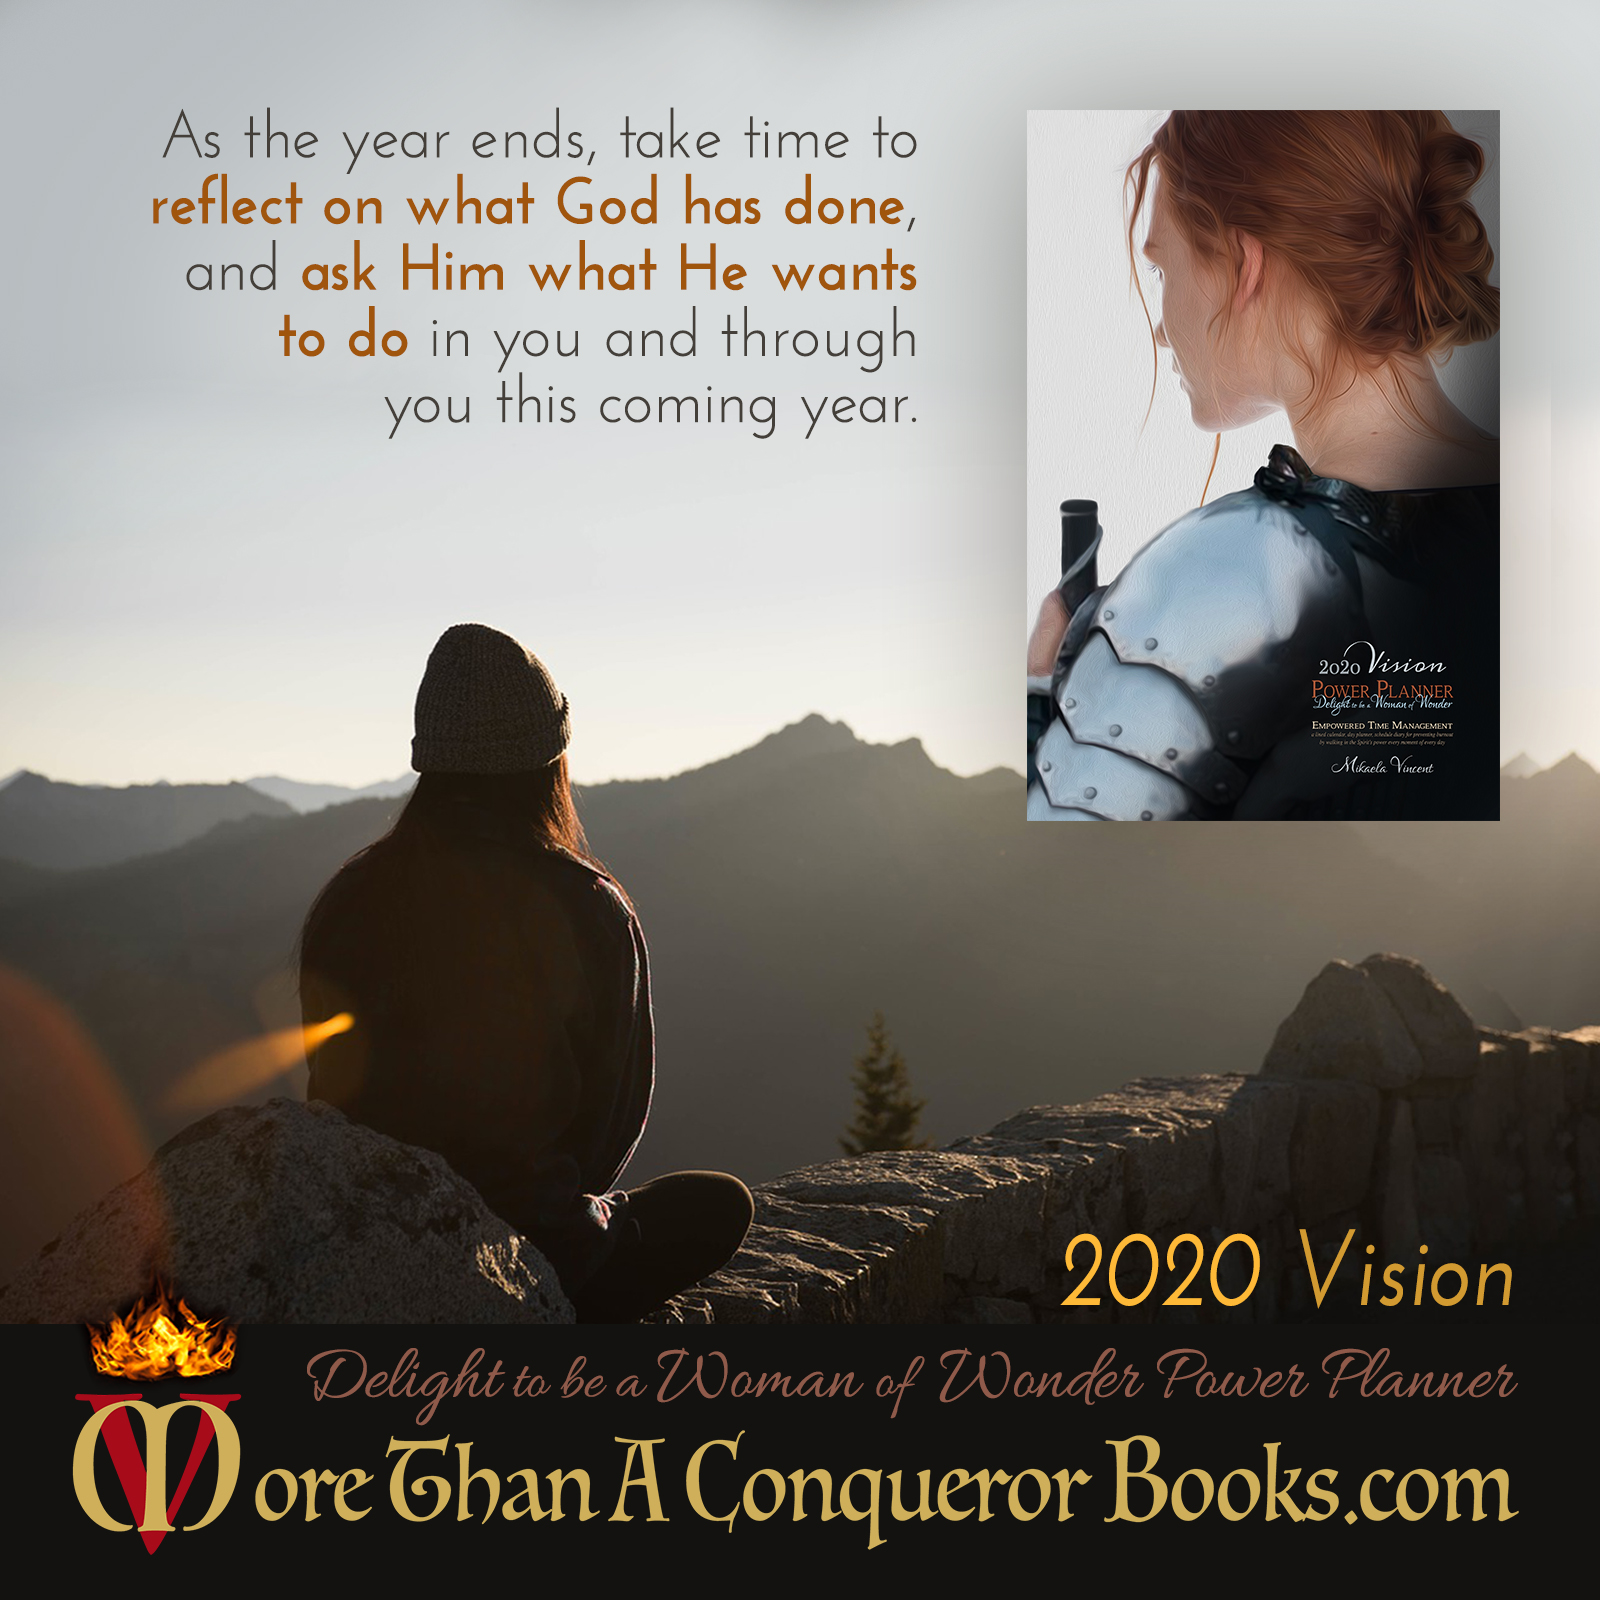 New Year-2020 Vision Power Planner-Reflect on old year-Mikaela Vincent-MoreThanAConquerorBooks